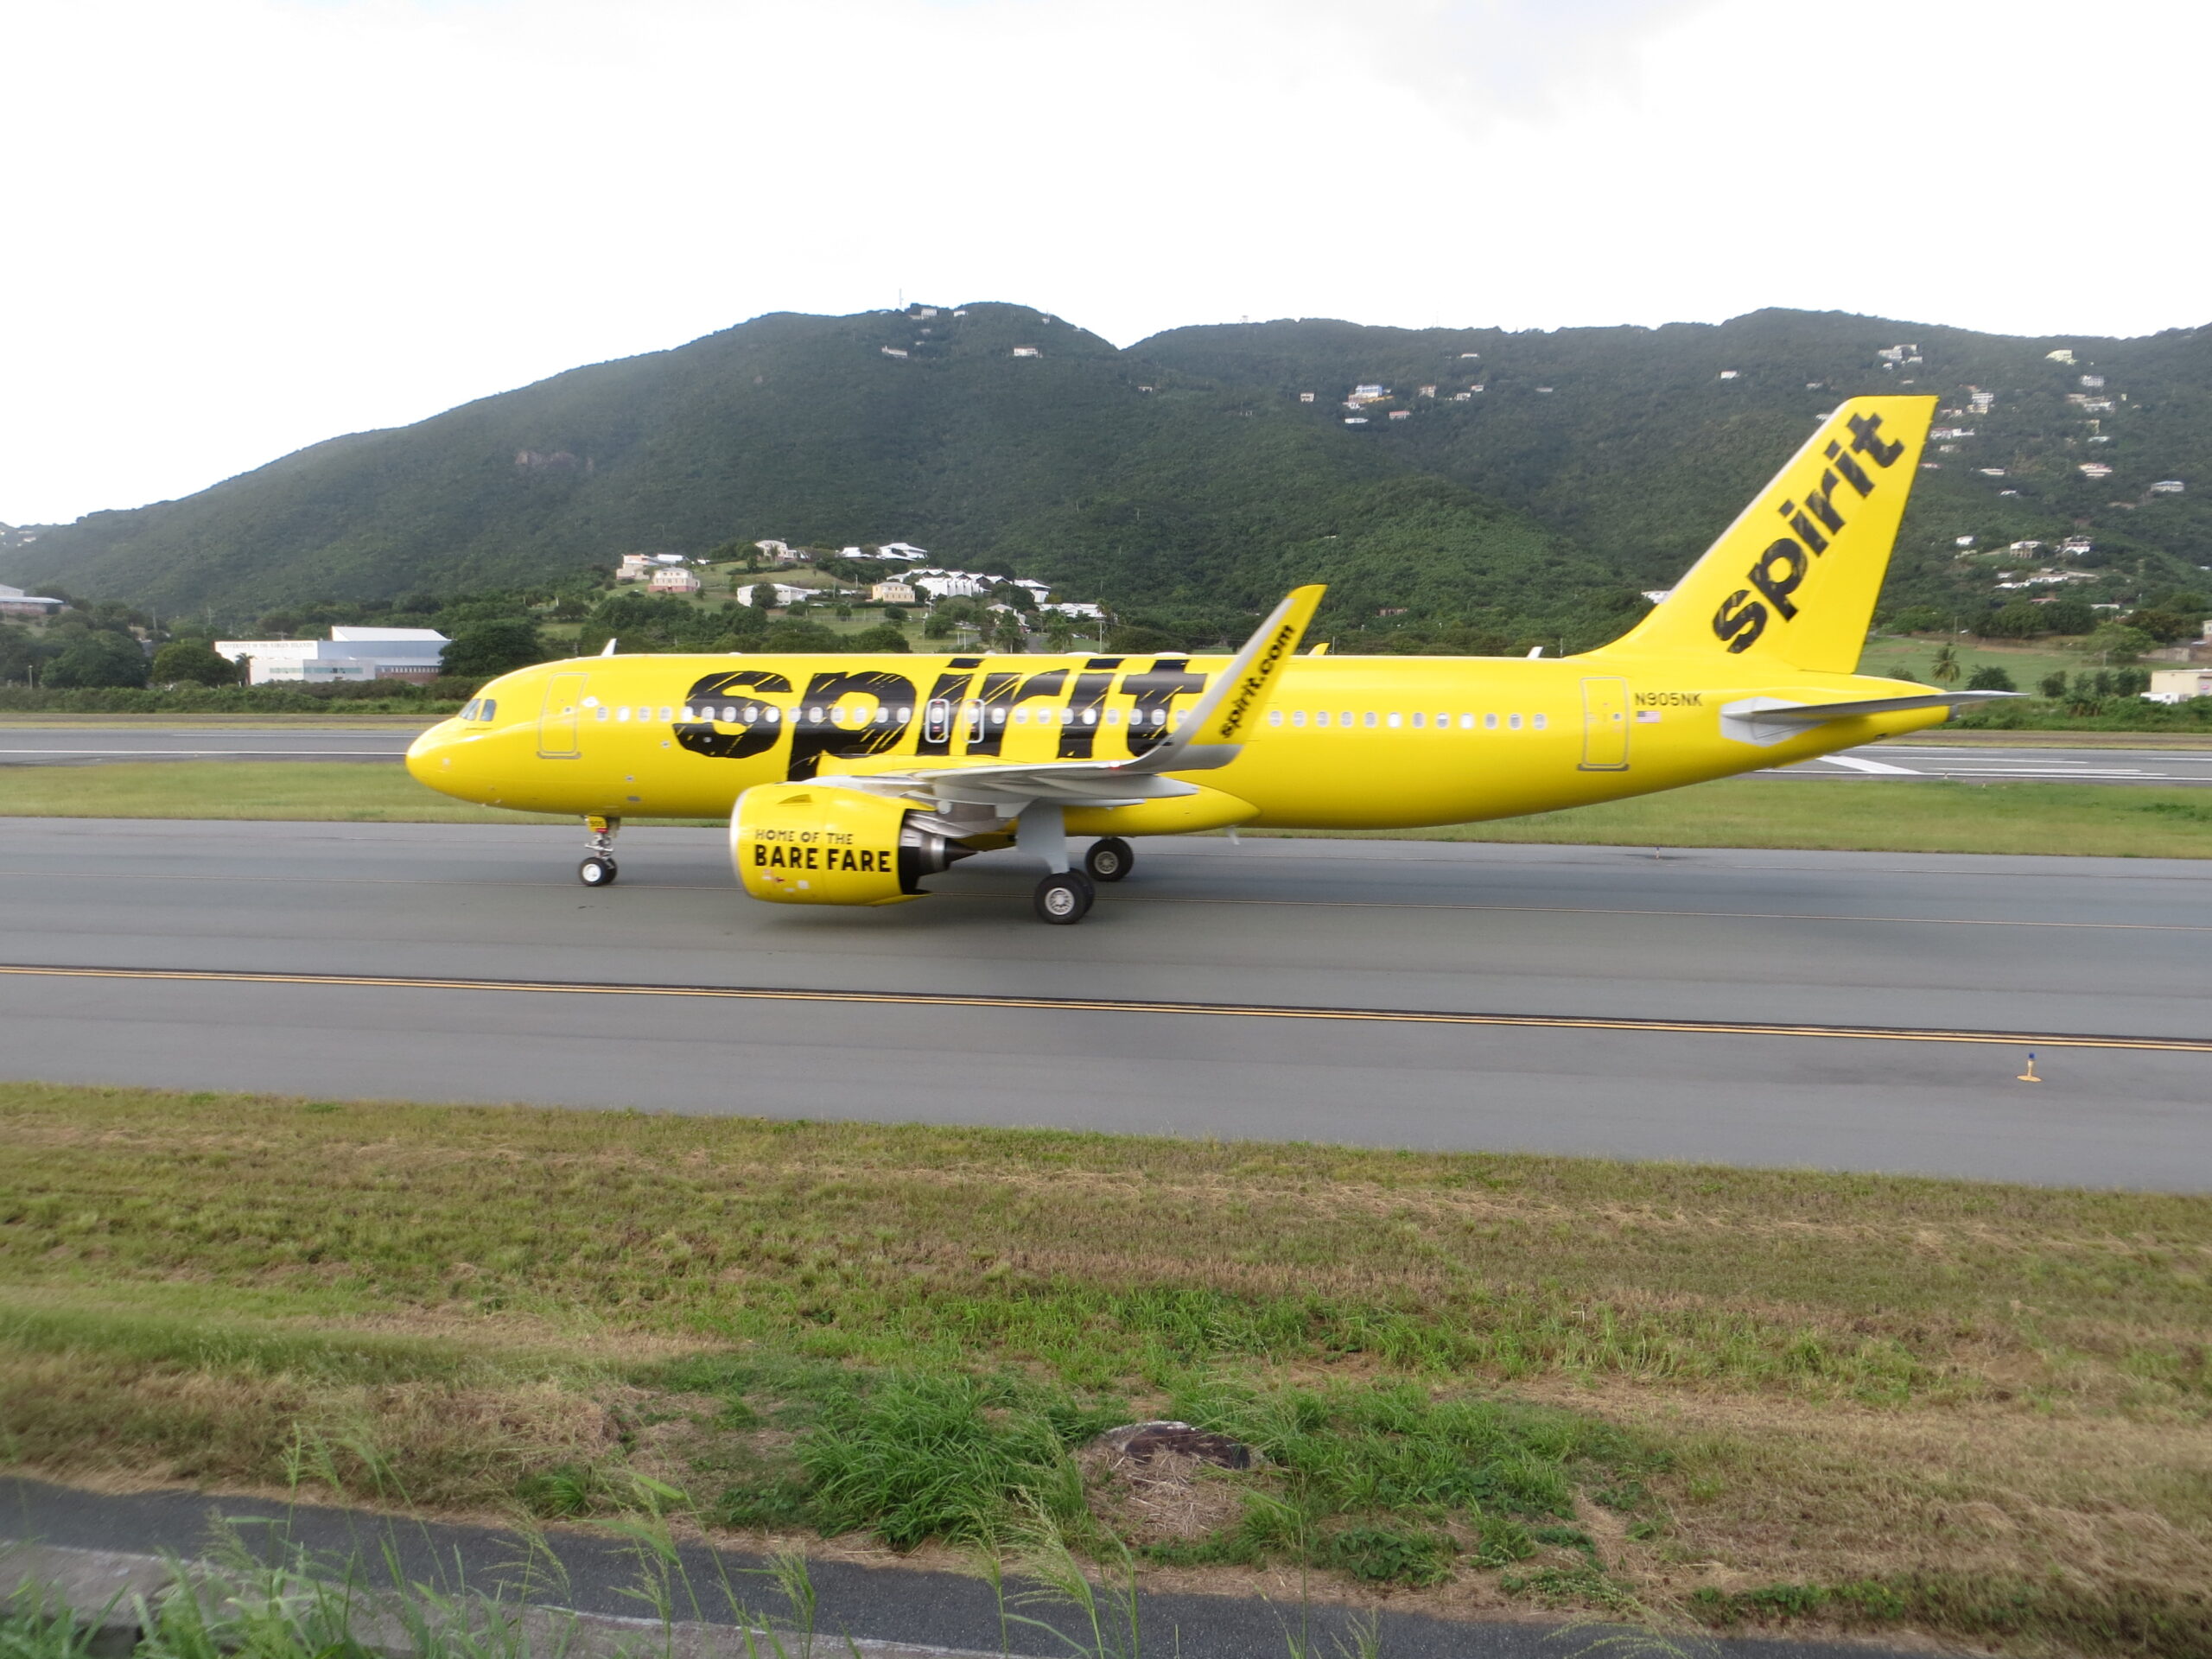 3 Illegal Aliens From India Arrive Aboard Spirit Airlines Flight To St. Croix: CBP